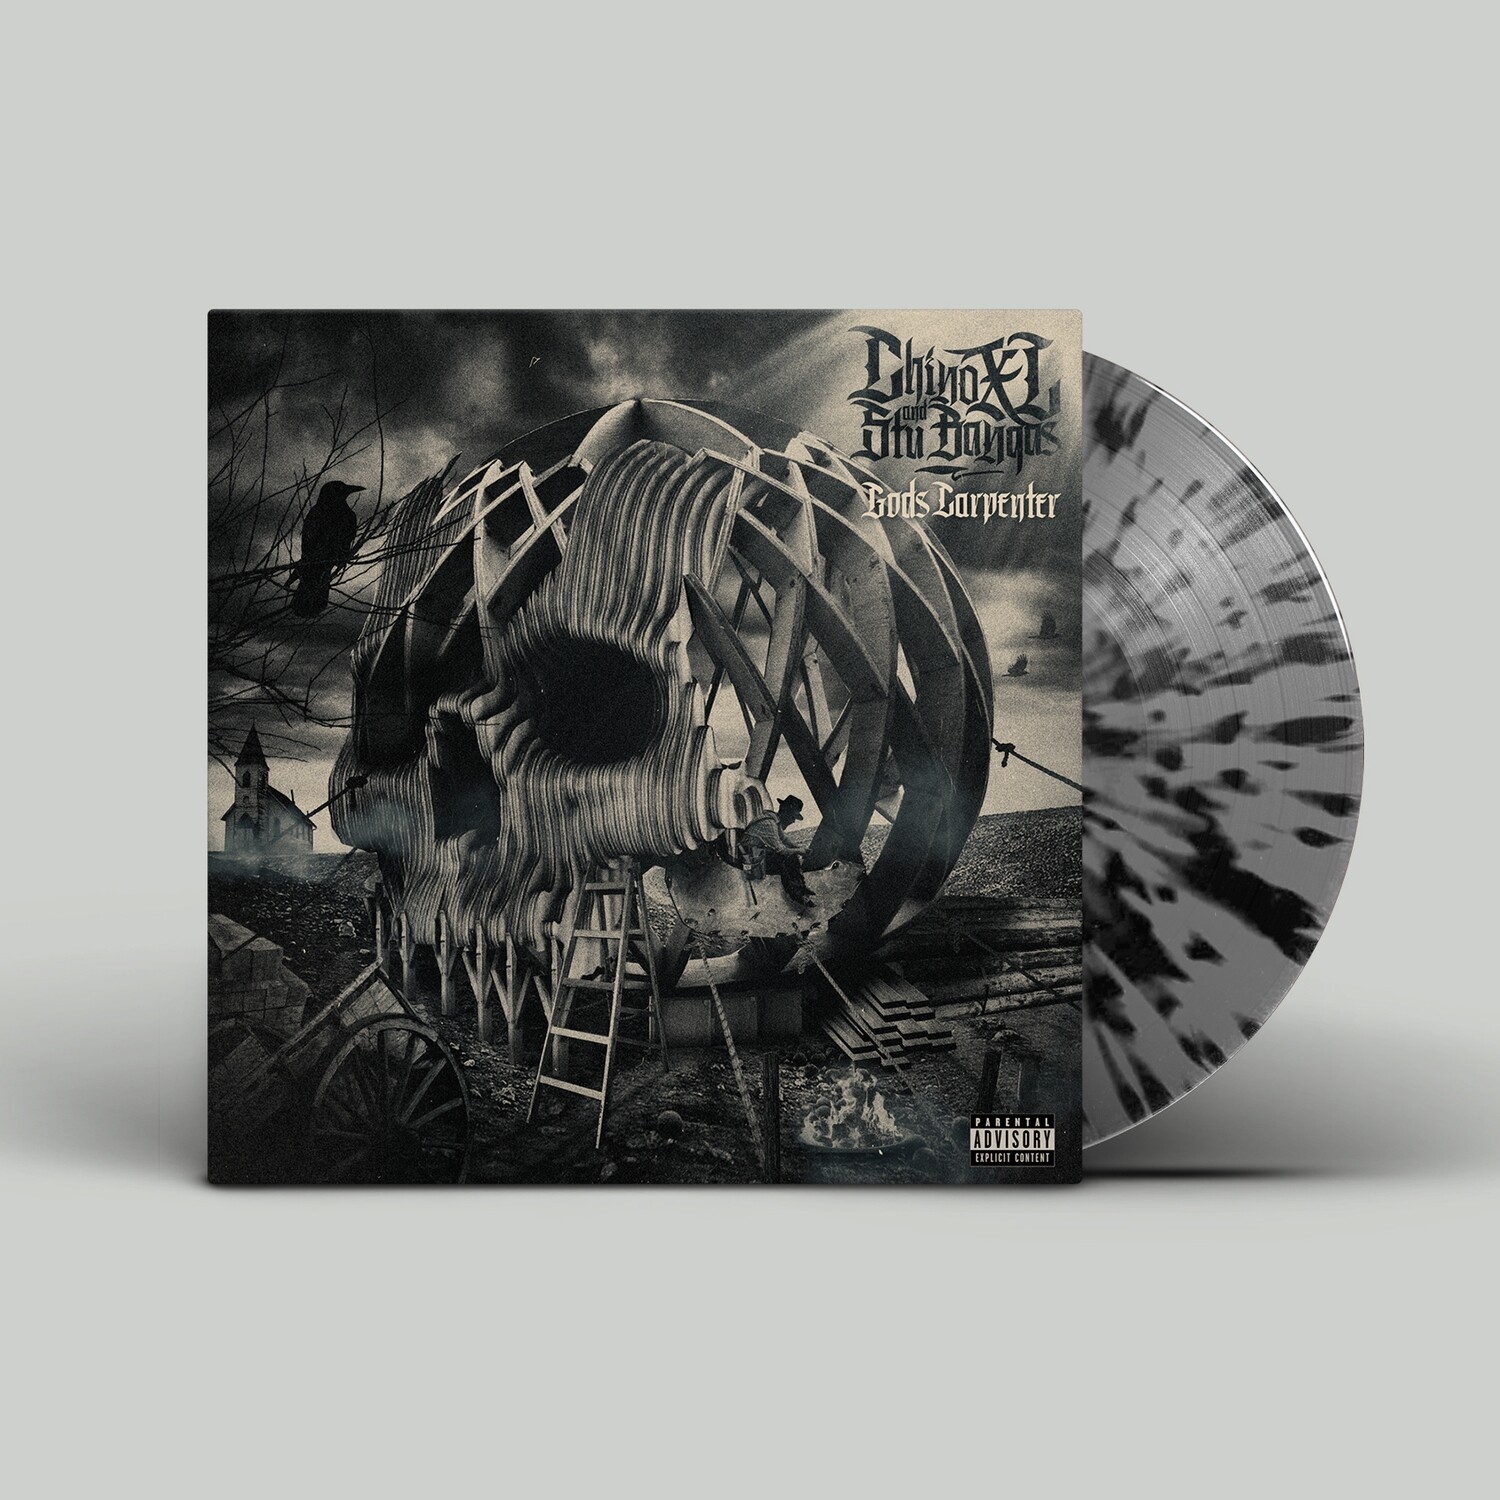 Chino XL and Stu Bangas &quot;God&#39;s Carpenter&quot; LP Vinyl (Grey and Black Splatter Vinyl - Pre-Order - SHIPS BY END OF OCTOBER)